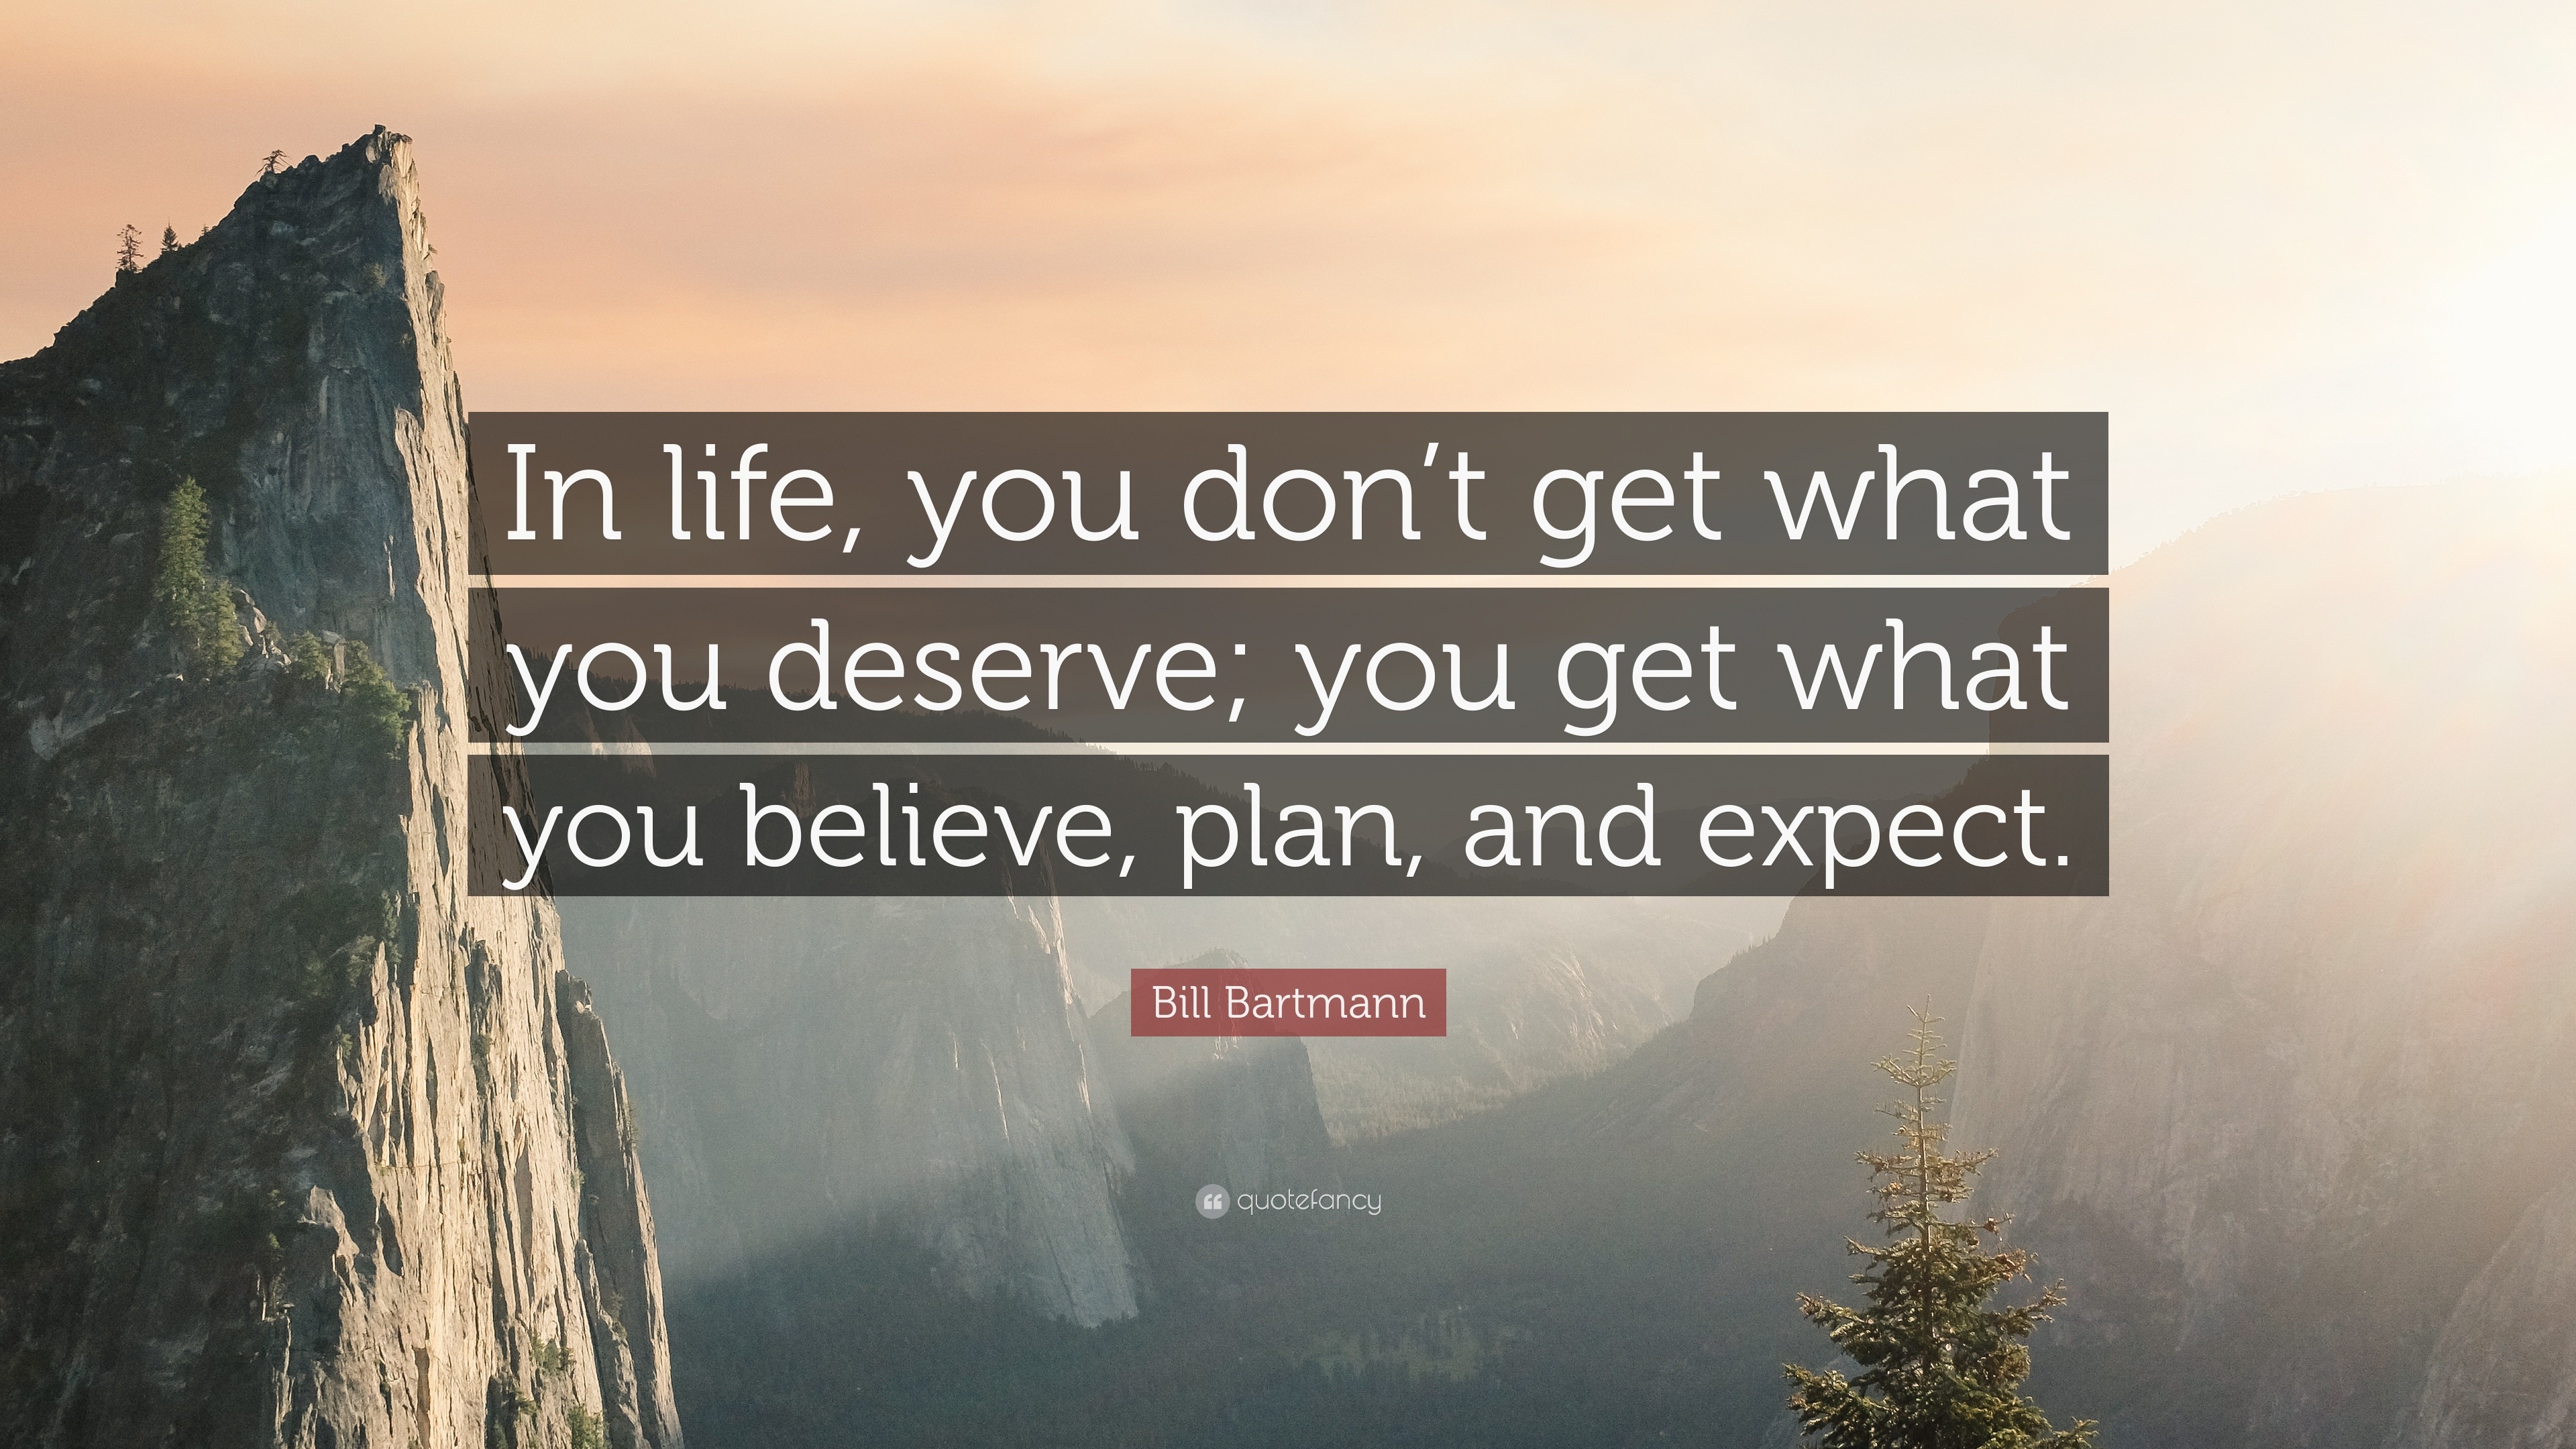 Bill Bartmann Quote: “In Life, You Don't Get What You Deserve; You Get What You